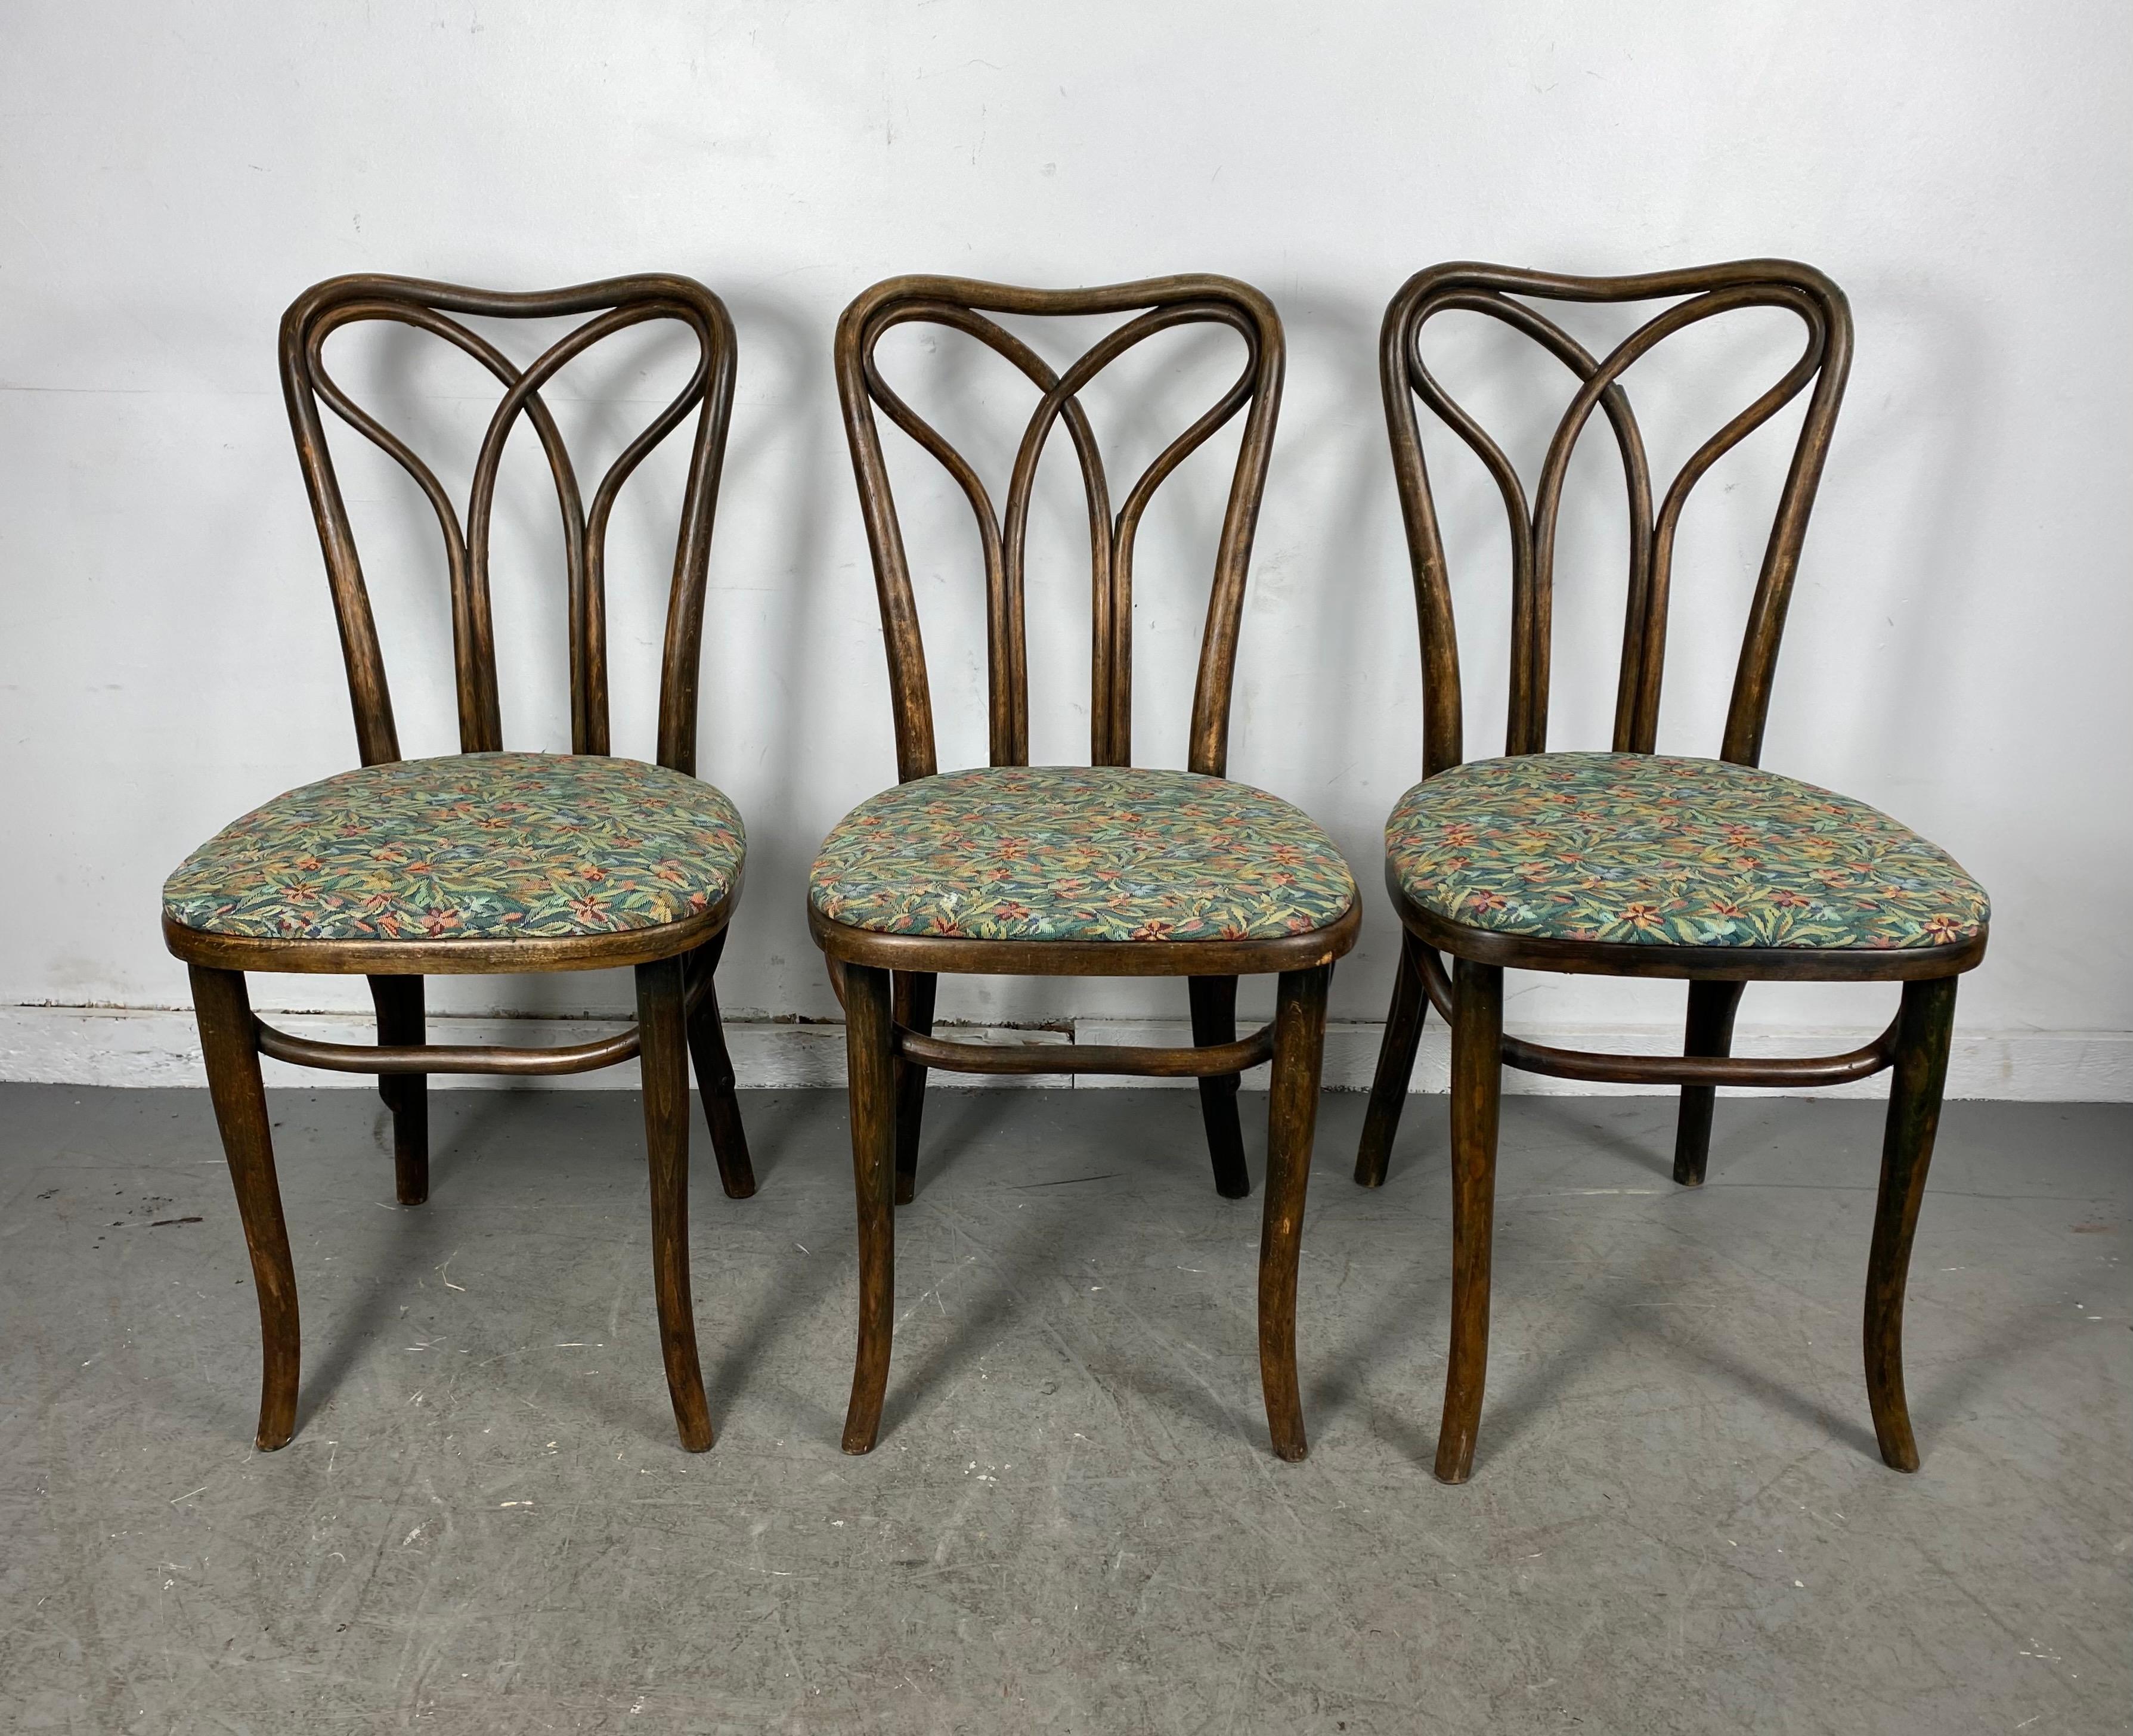 Austrian Art Nouveau bentwood side chair attributed to J & J Kohn, early 1900's. Amazing design. Wonderful patina, quality construction. Hand delivery avail to New York City or anywhere en route from Buffalo NY.